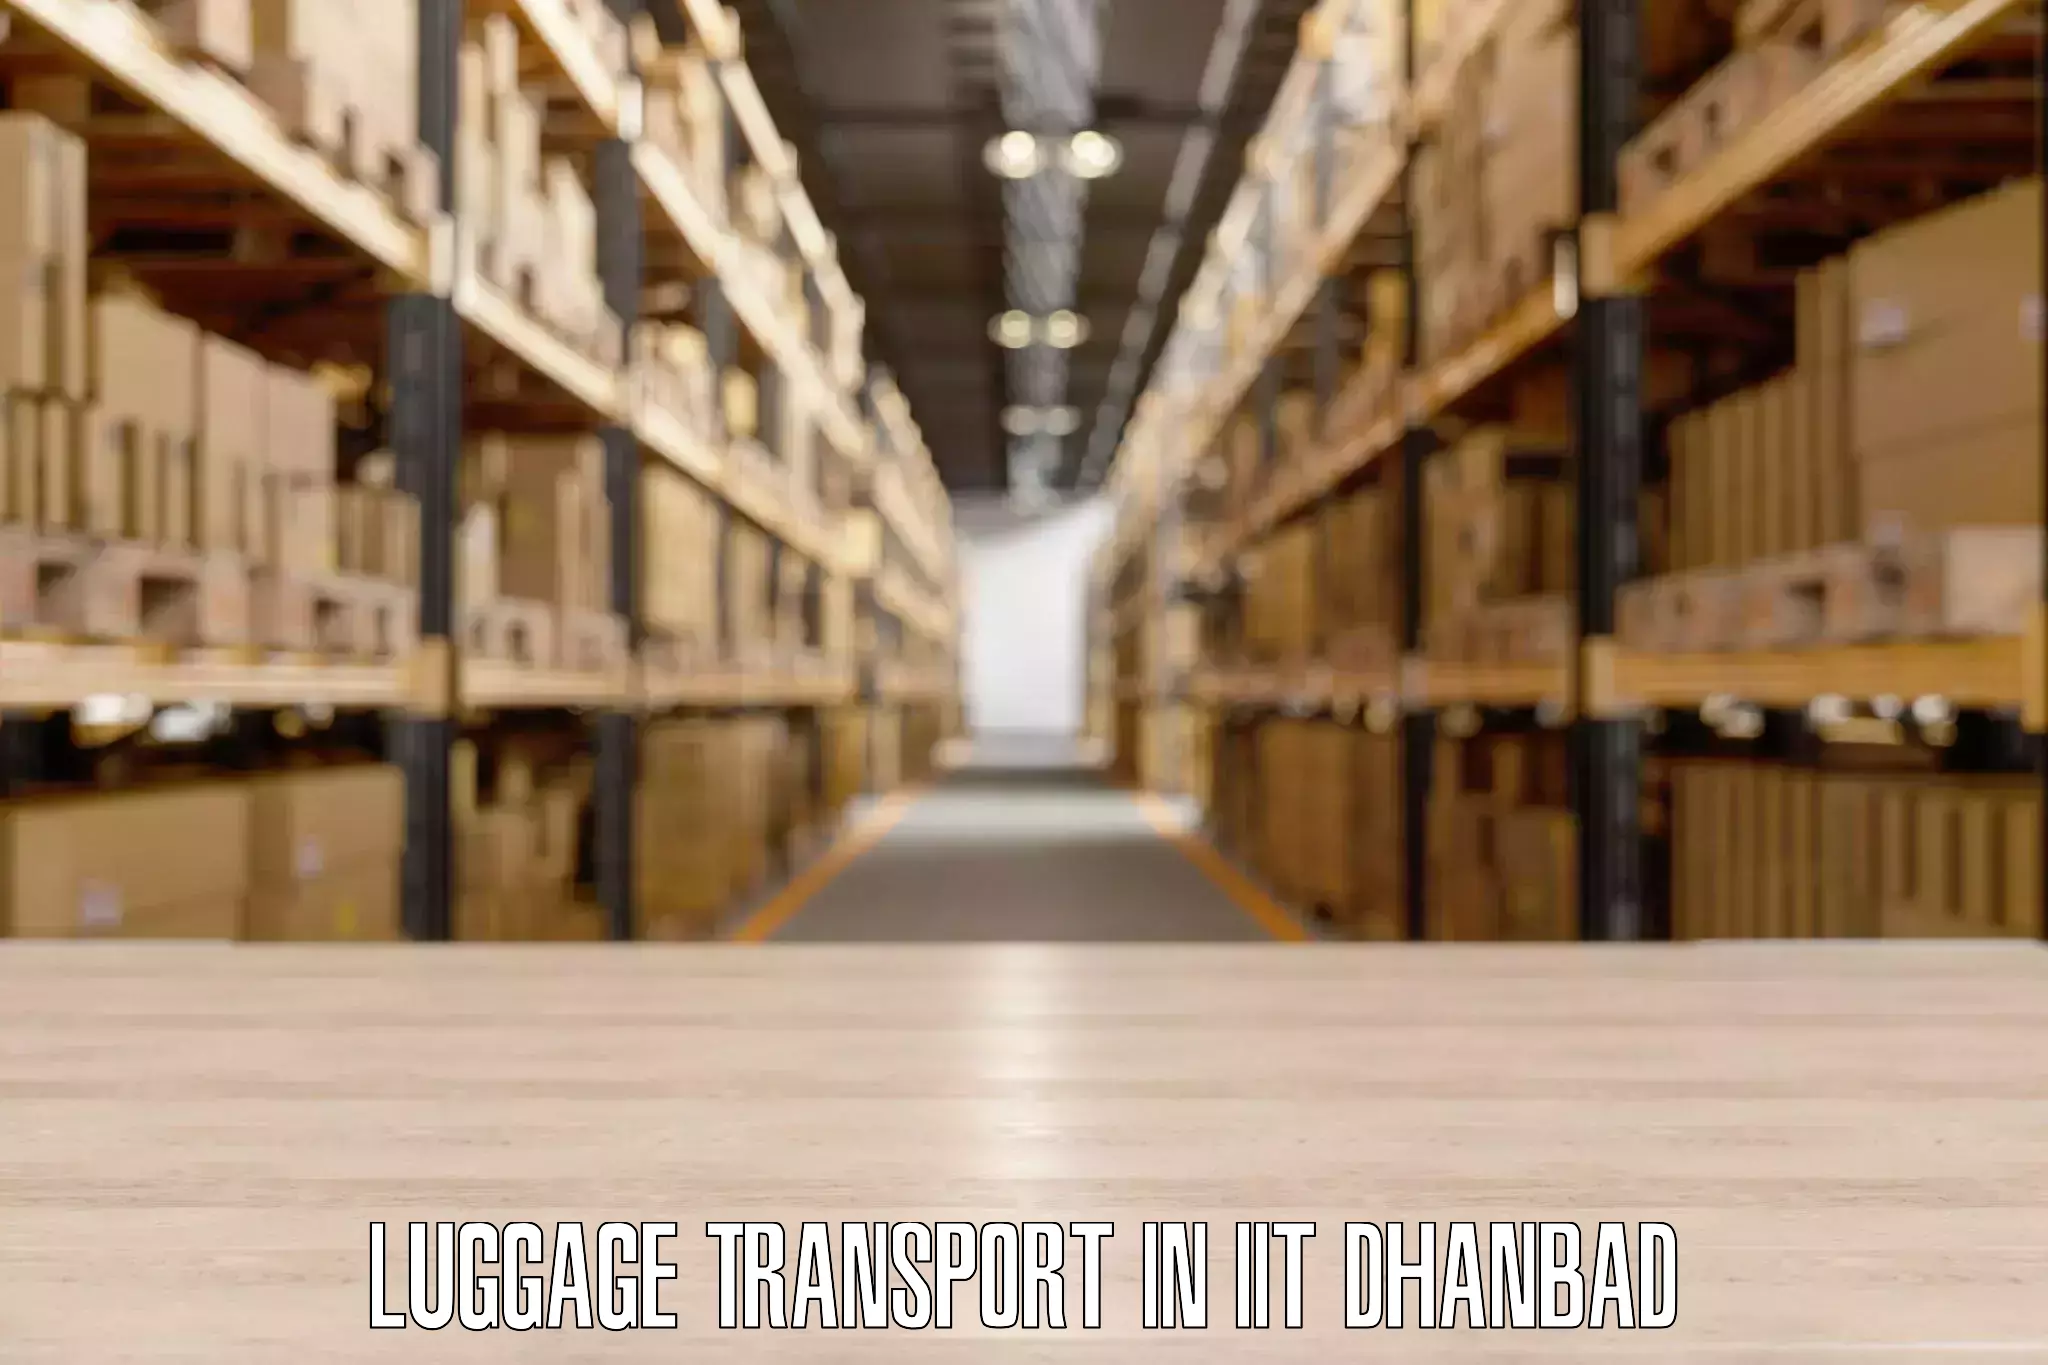 Luggage transport service in IIT Dhanbad